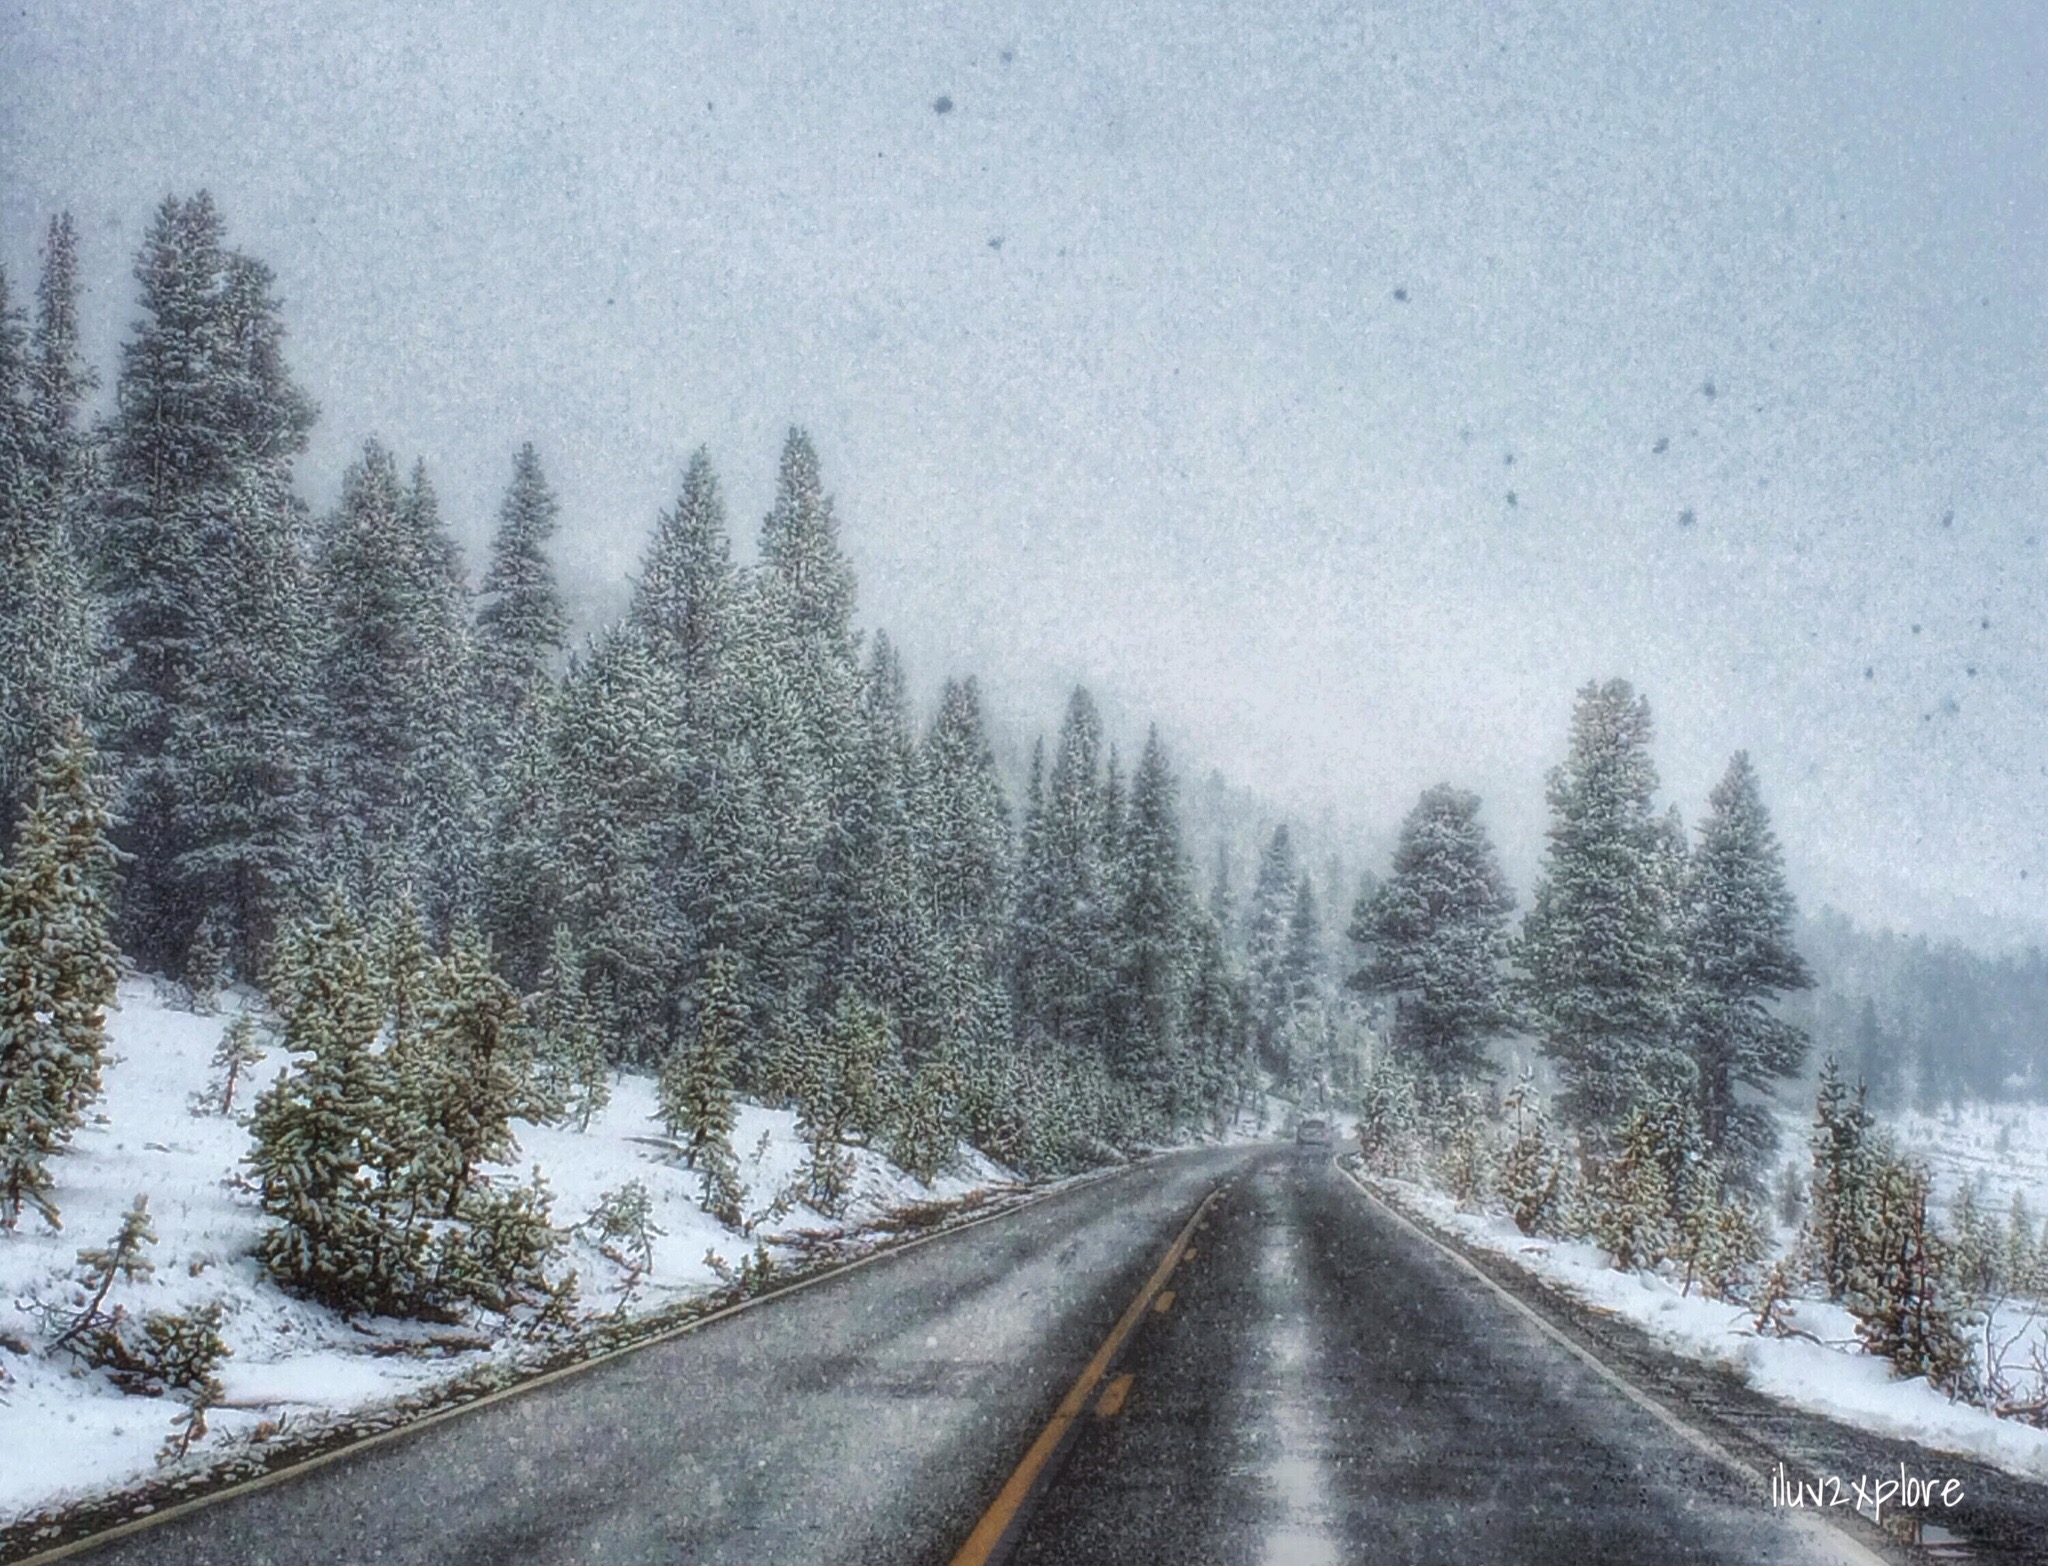 5PM PST: Highway120 (Tioga) just past Tuolumne Meadows in Yosemite National Park.